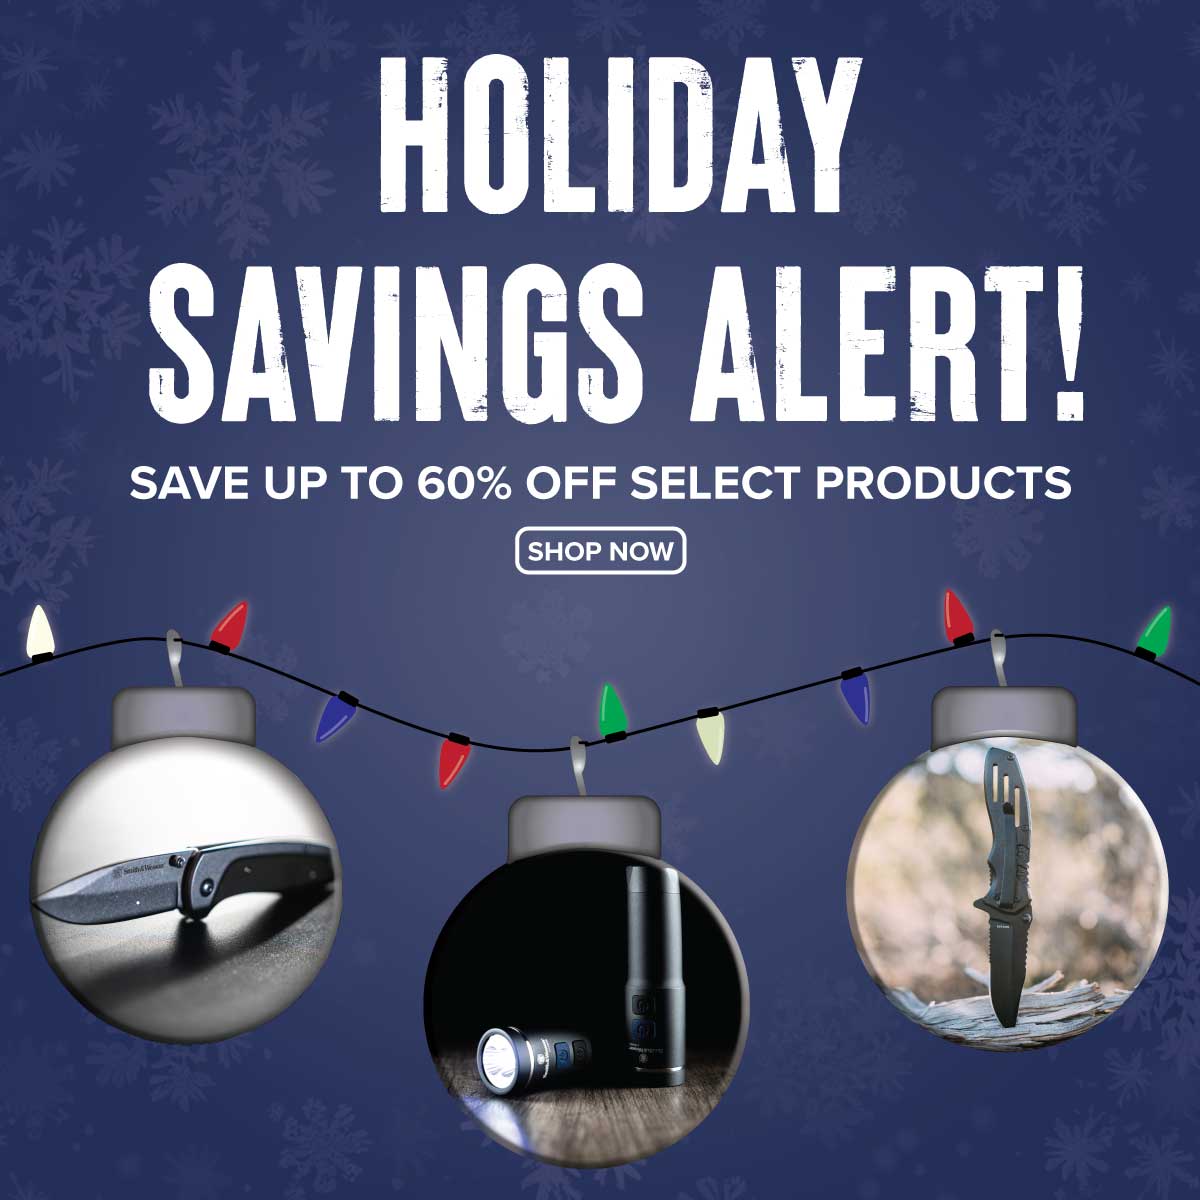 holiday savings alert, save up to 60% off select products, shop now